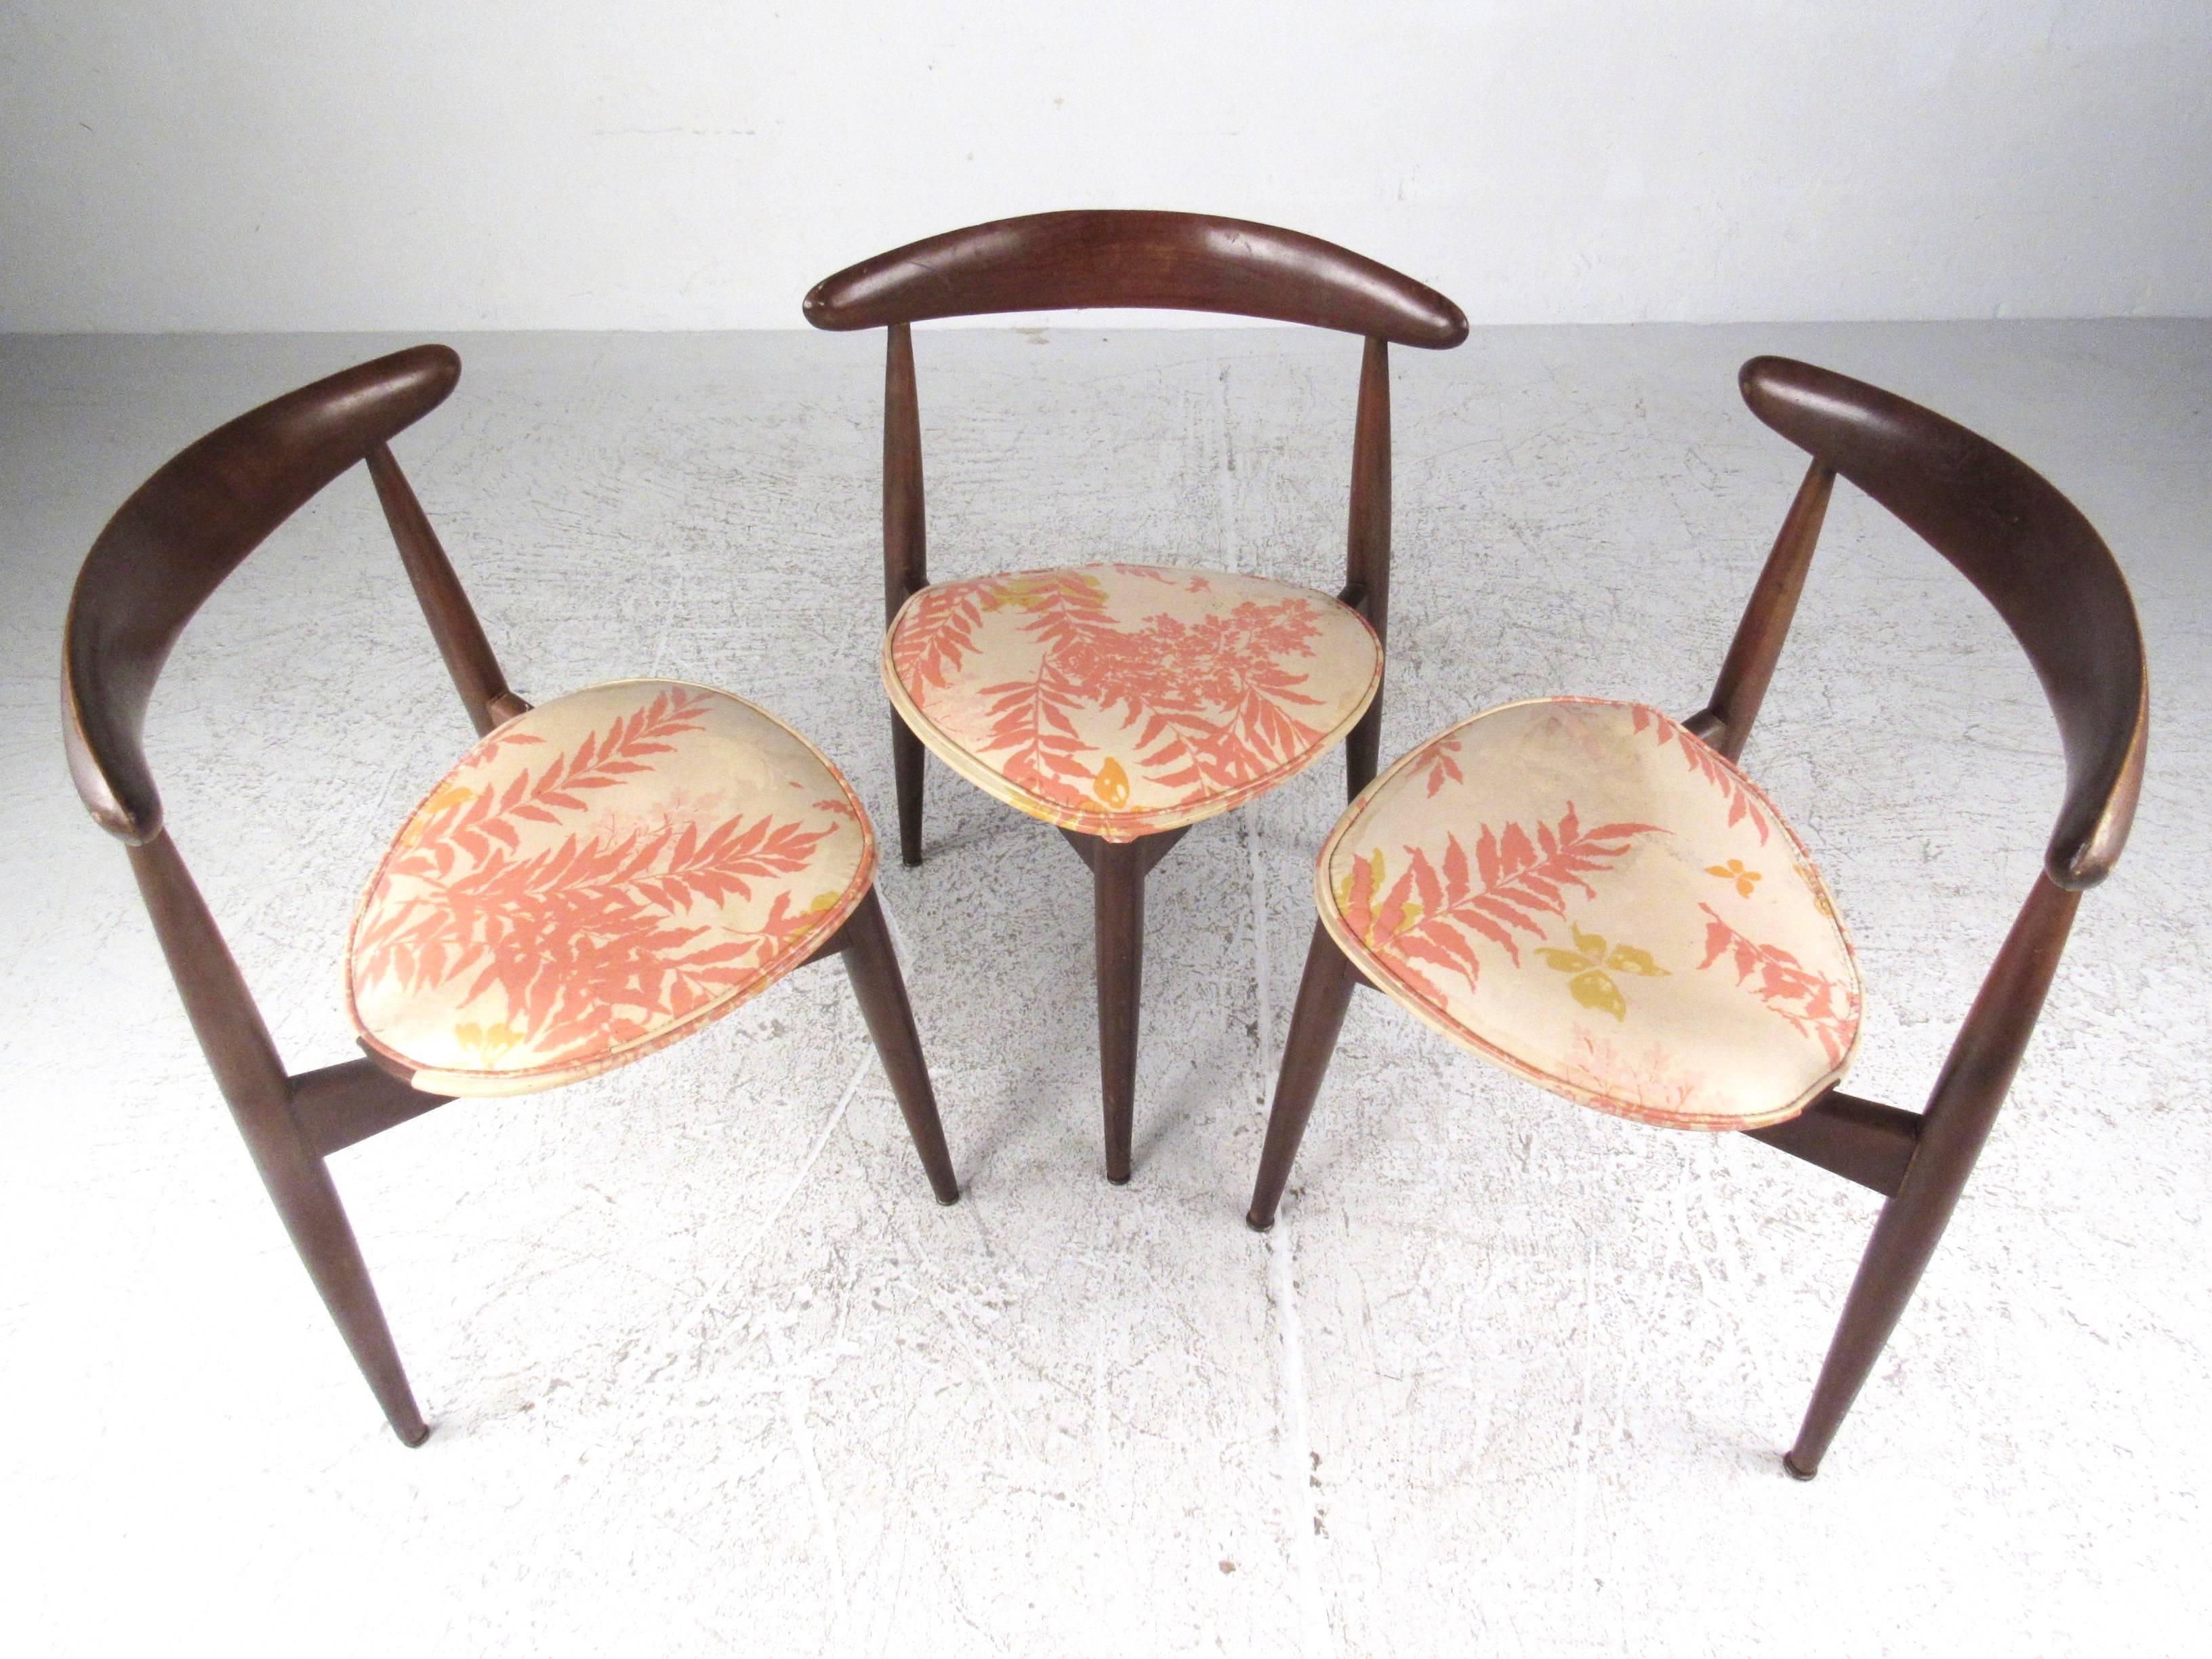 This set of vintage chairs features three leg design by Hans Wegner, with unique heart shaped seats, sculpted legs and seat back, and stunning Mid-Century Modern style. These iconic chairs still bare the original manufacturer's markings, model